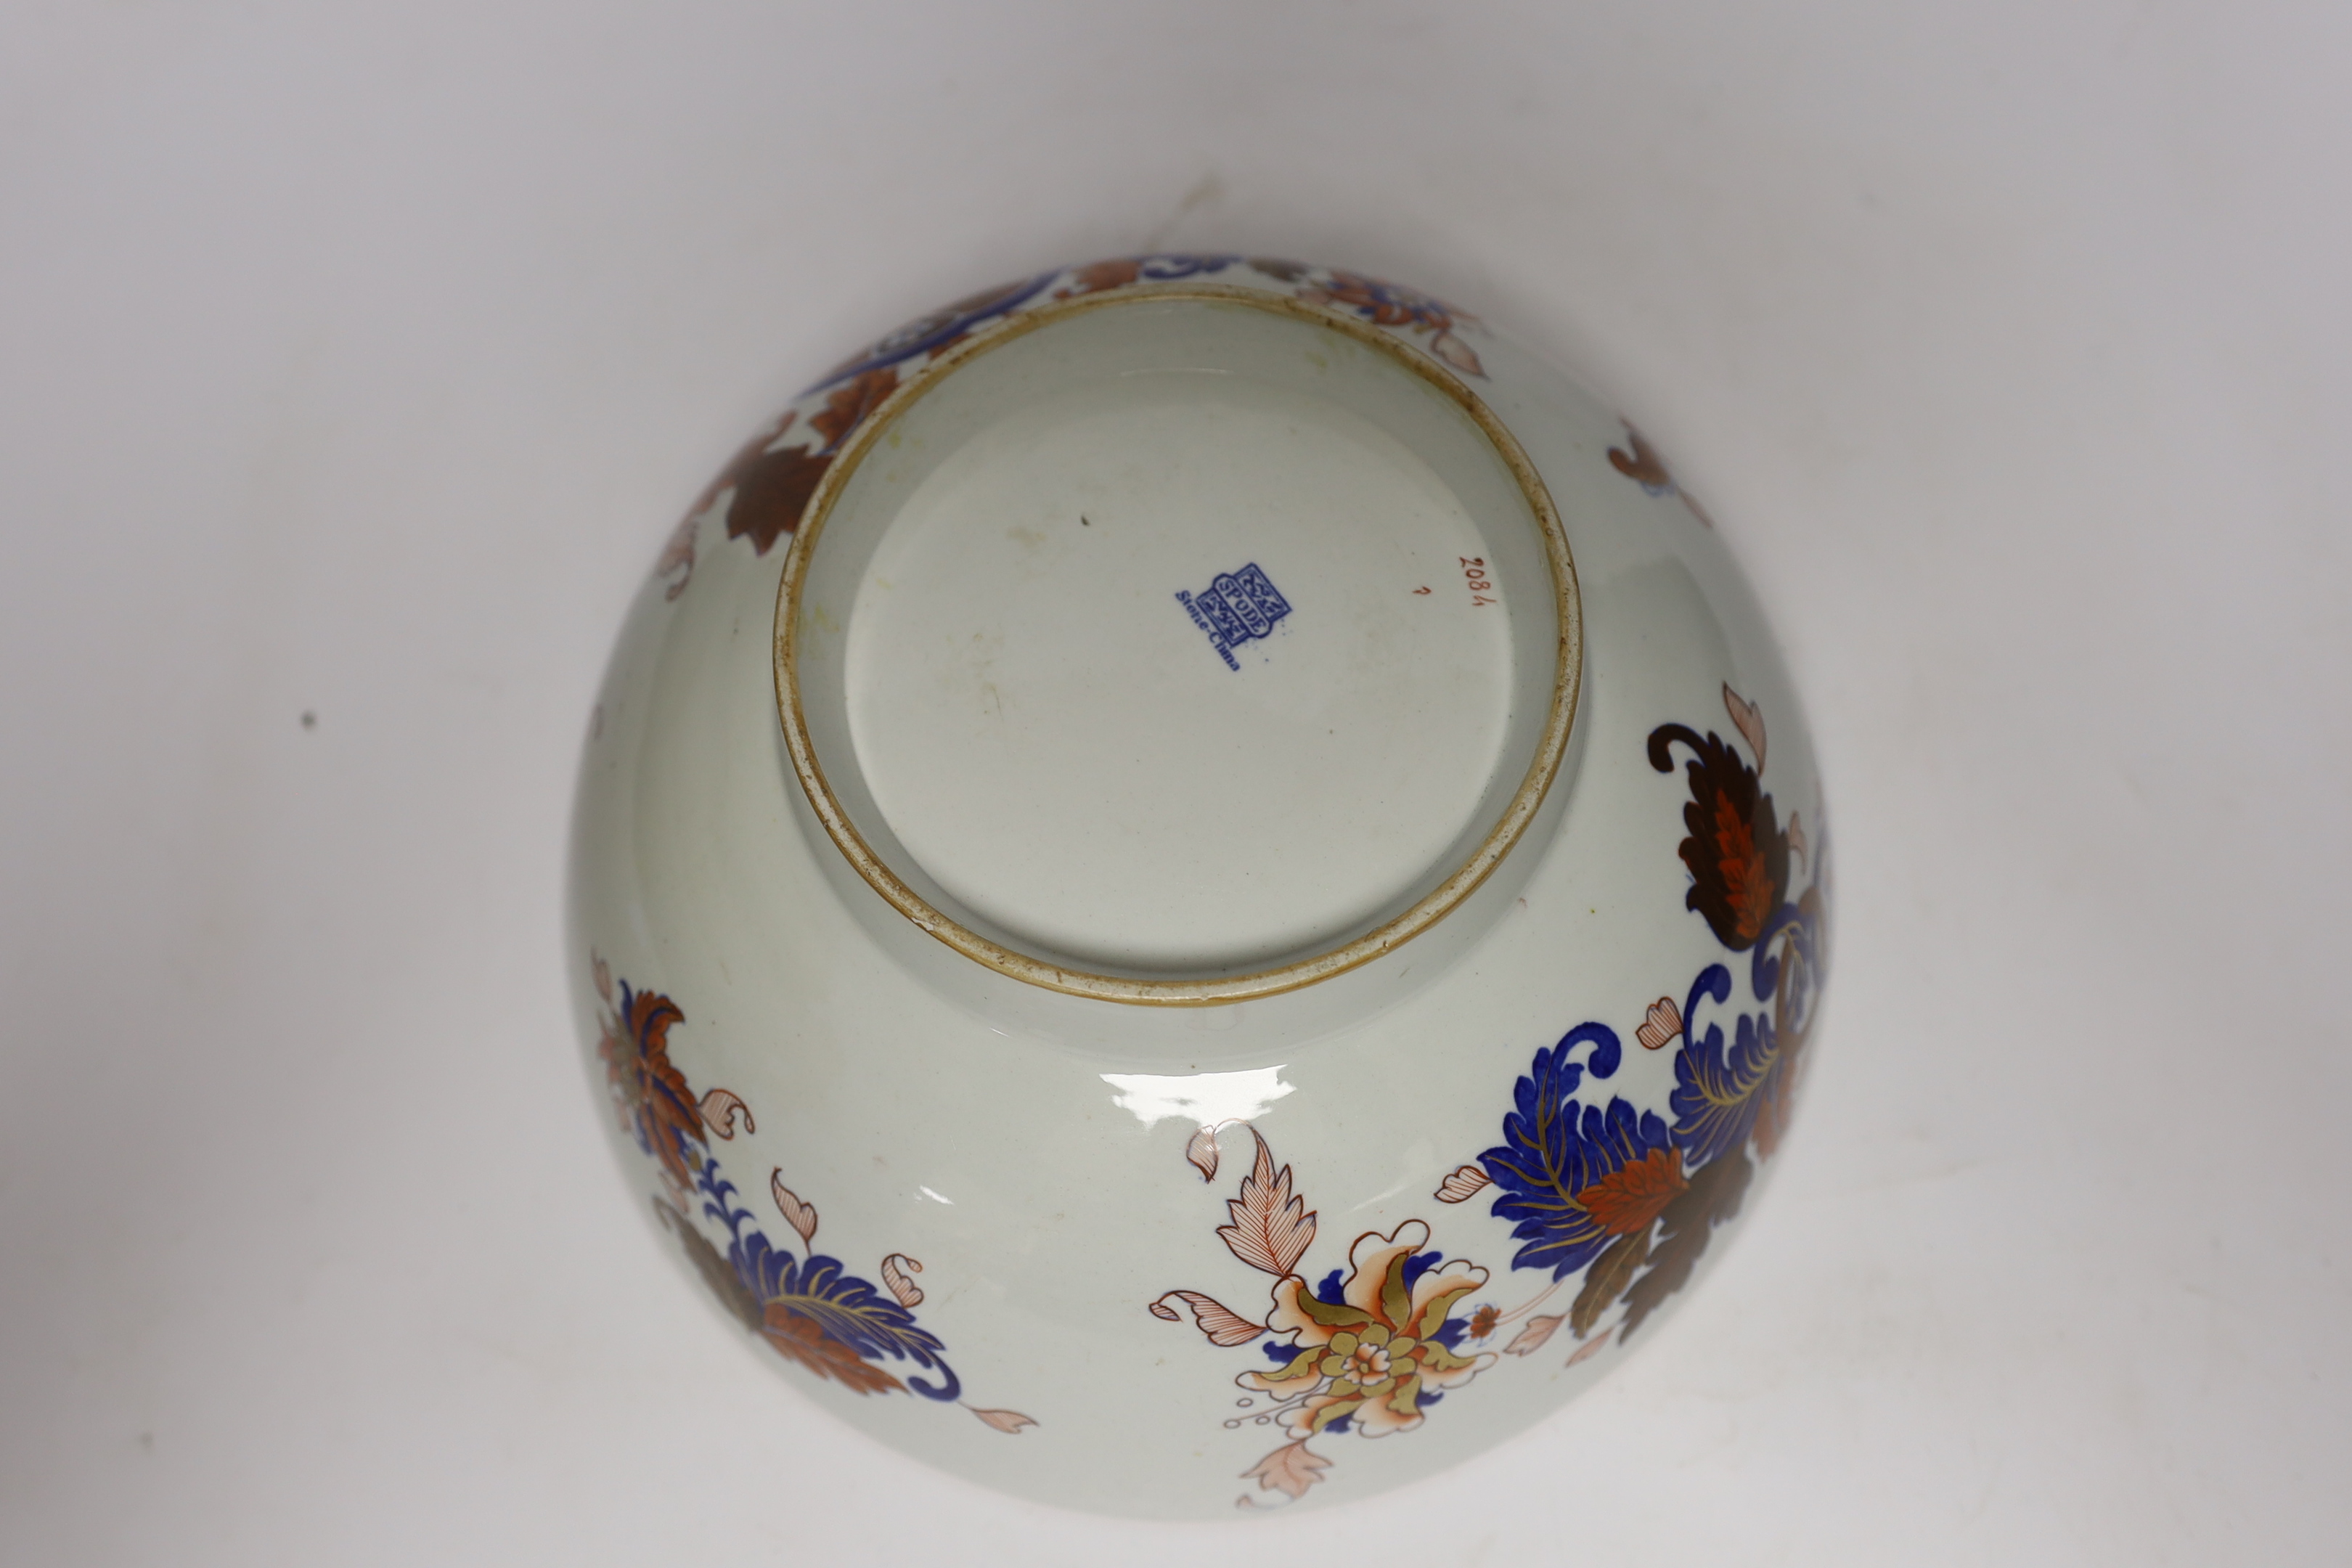 An early 19th century Spode Stone China fruit bowl, diameter 26cm